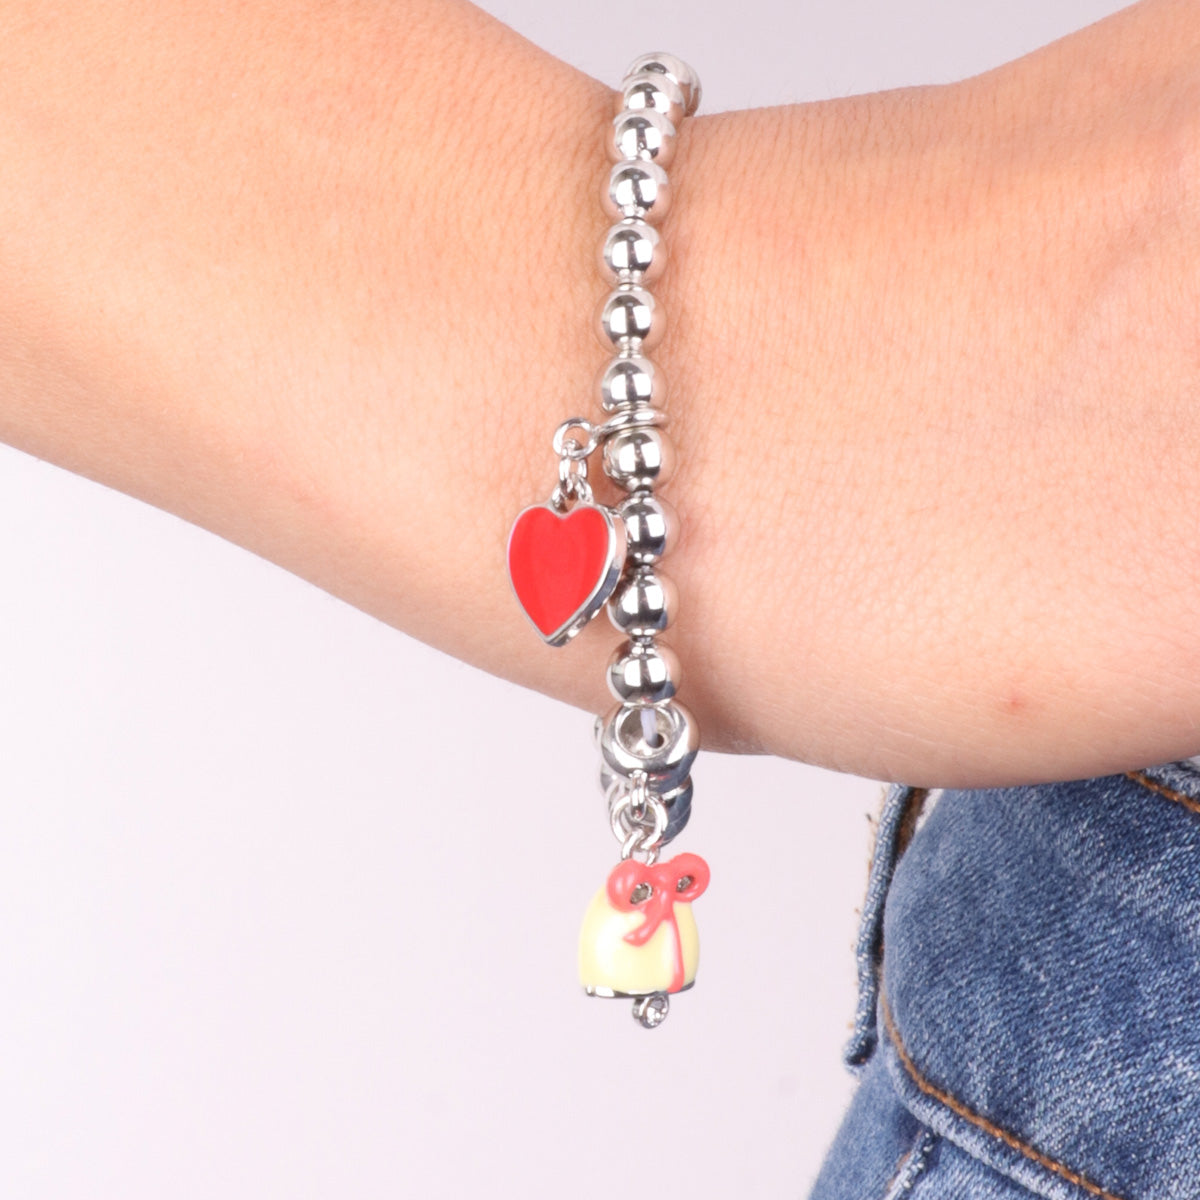 Metal bracelet yellow bell pendant with bow and red heart